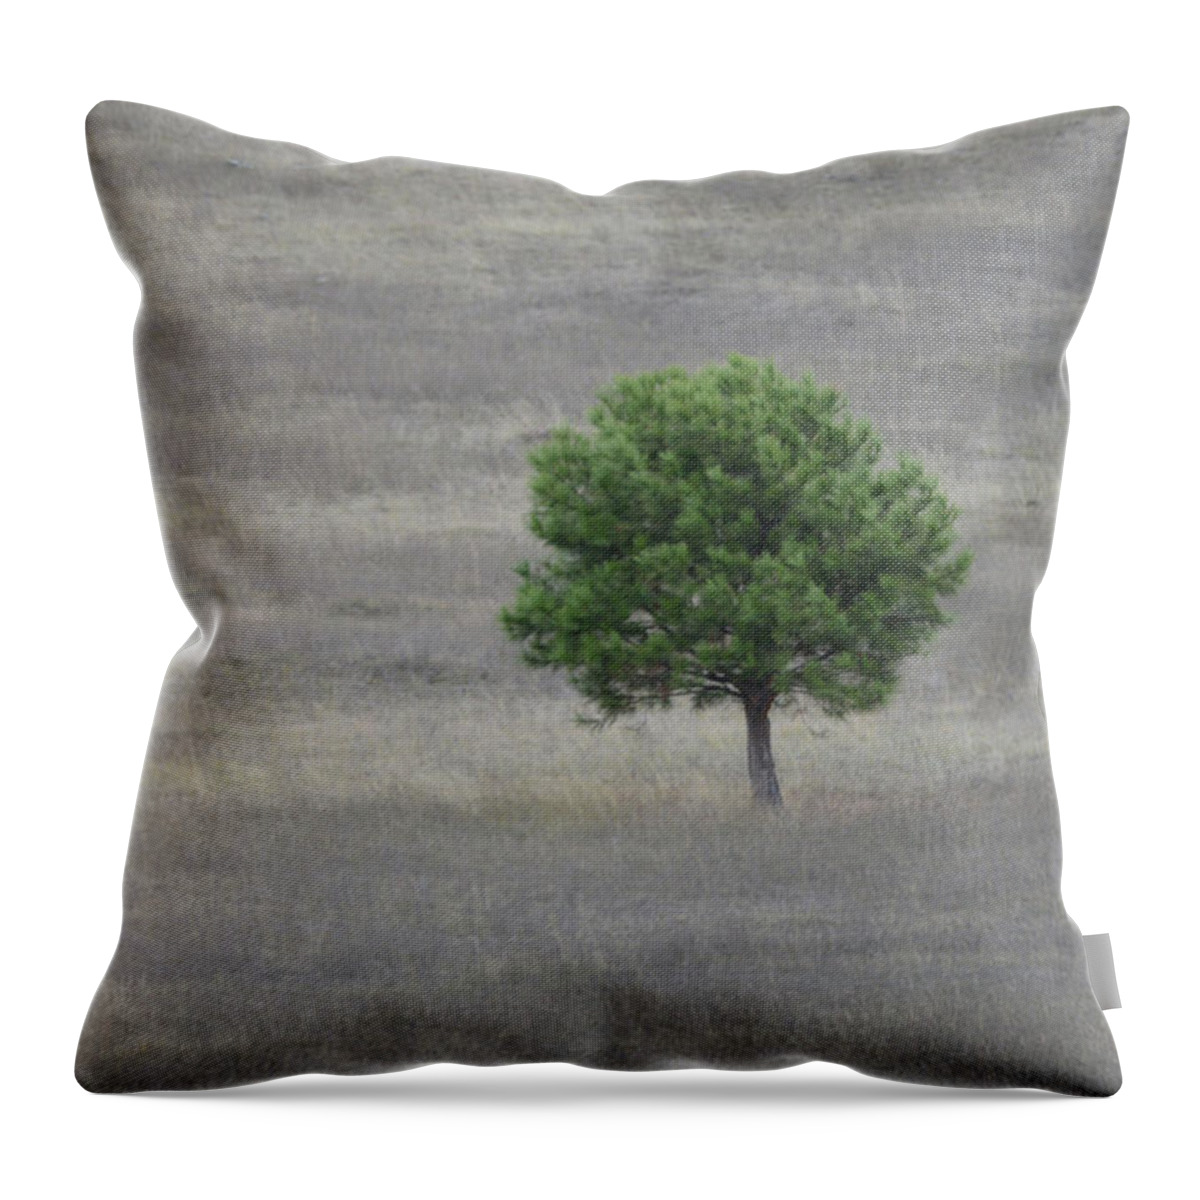 Solitary Throw Pillow featuring the photograph Solitary Tree by Whispering Peaks Photography